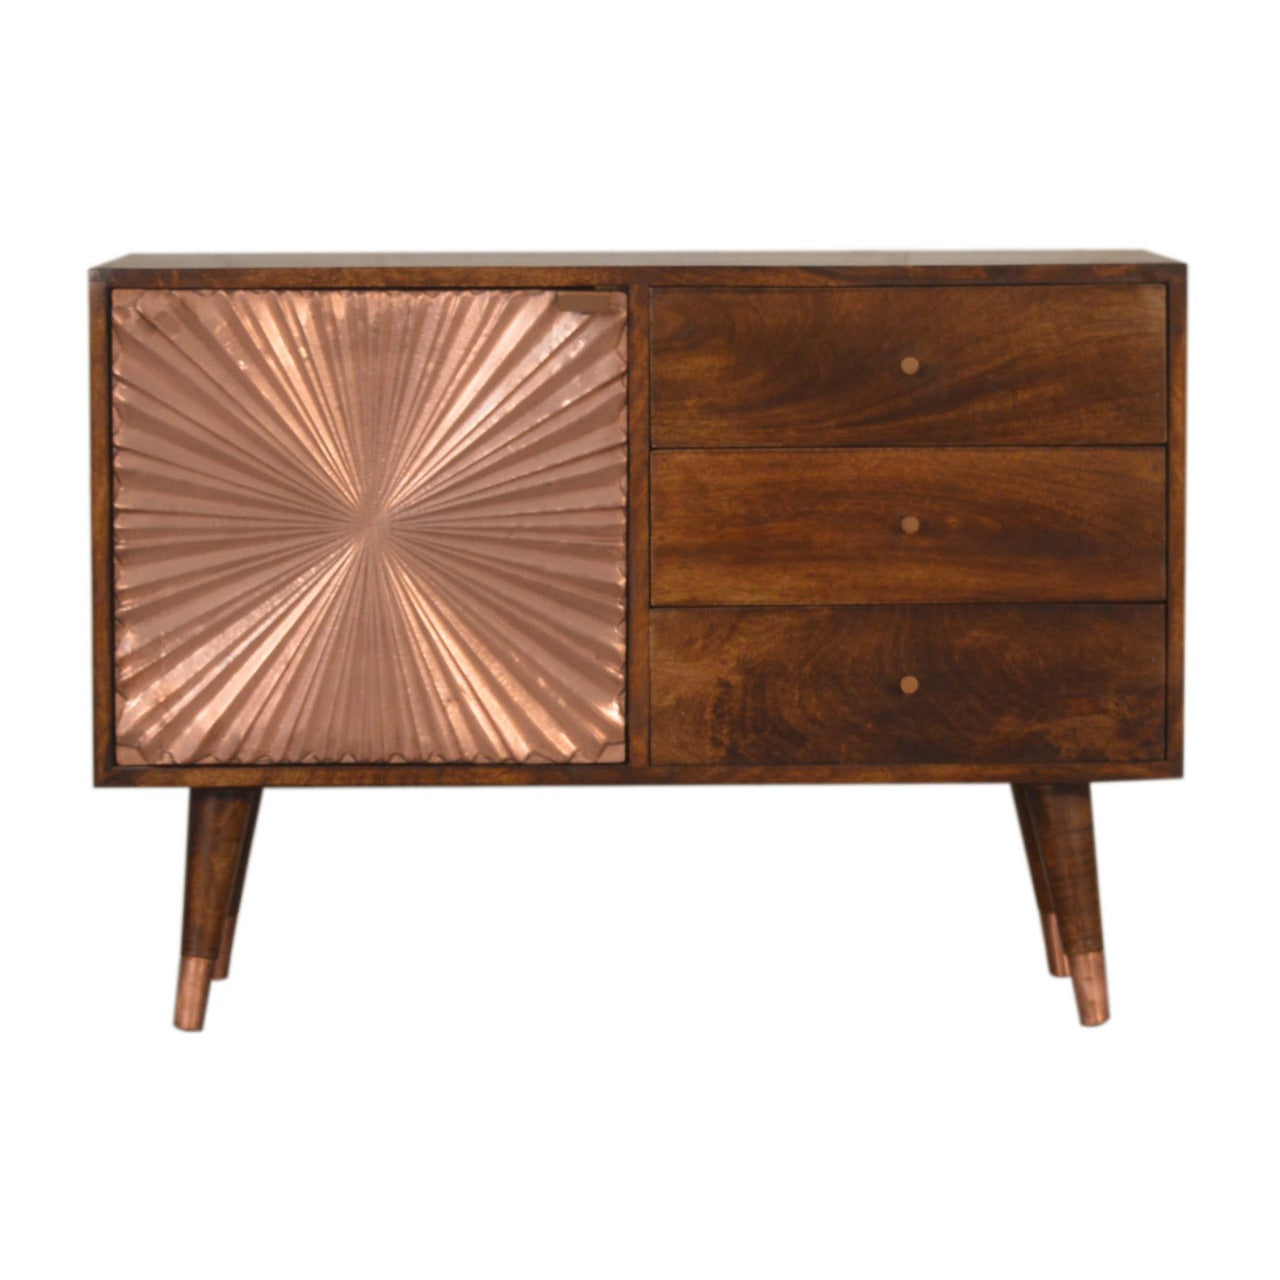 View Manila Copper Sideboard information